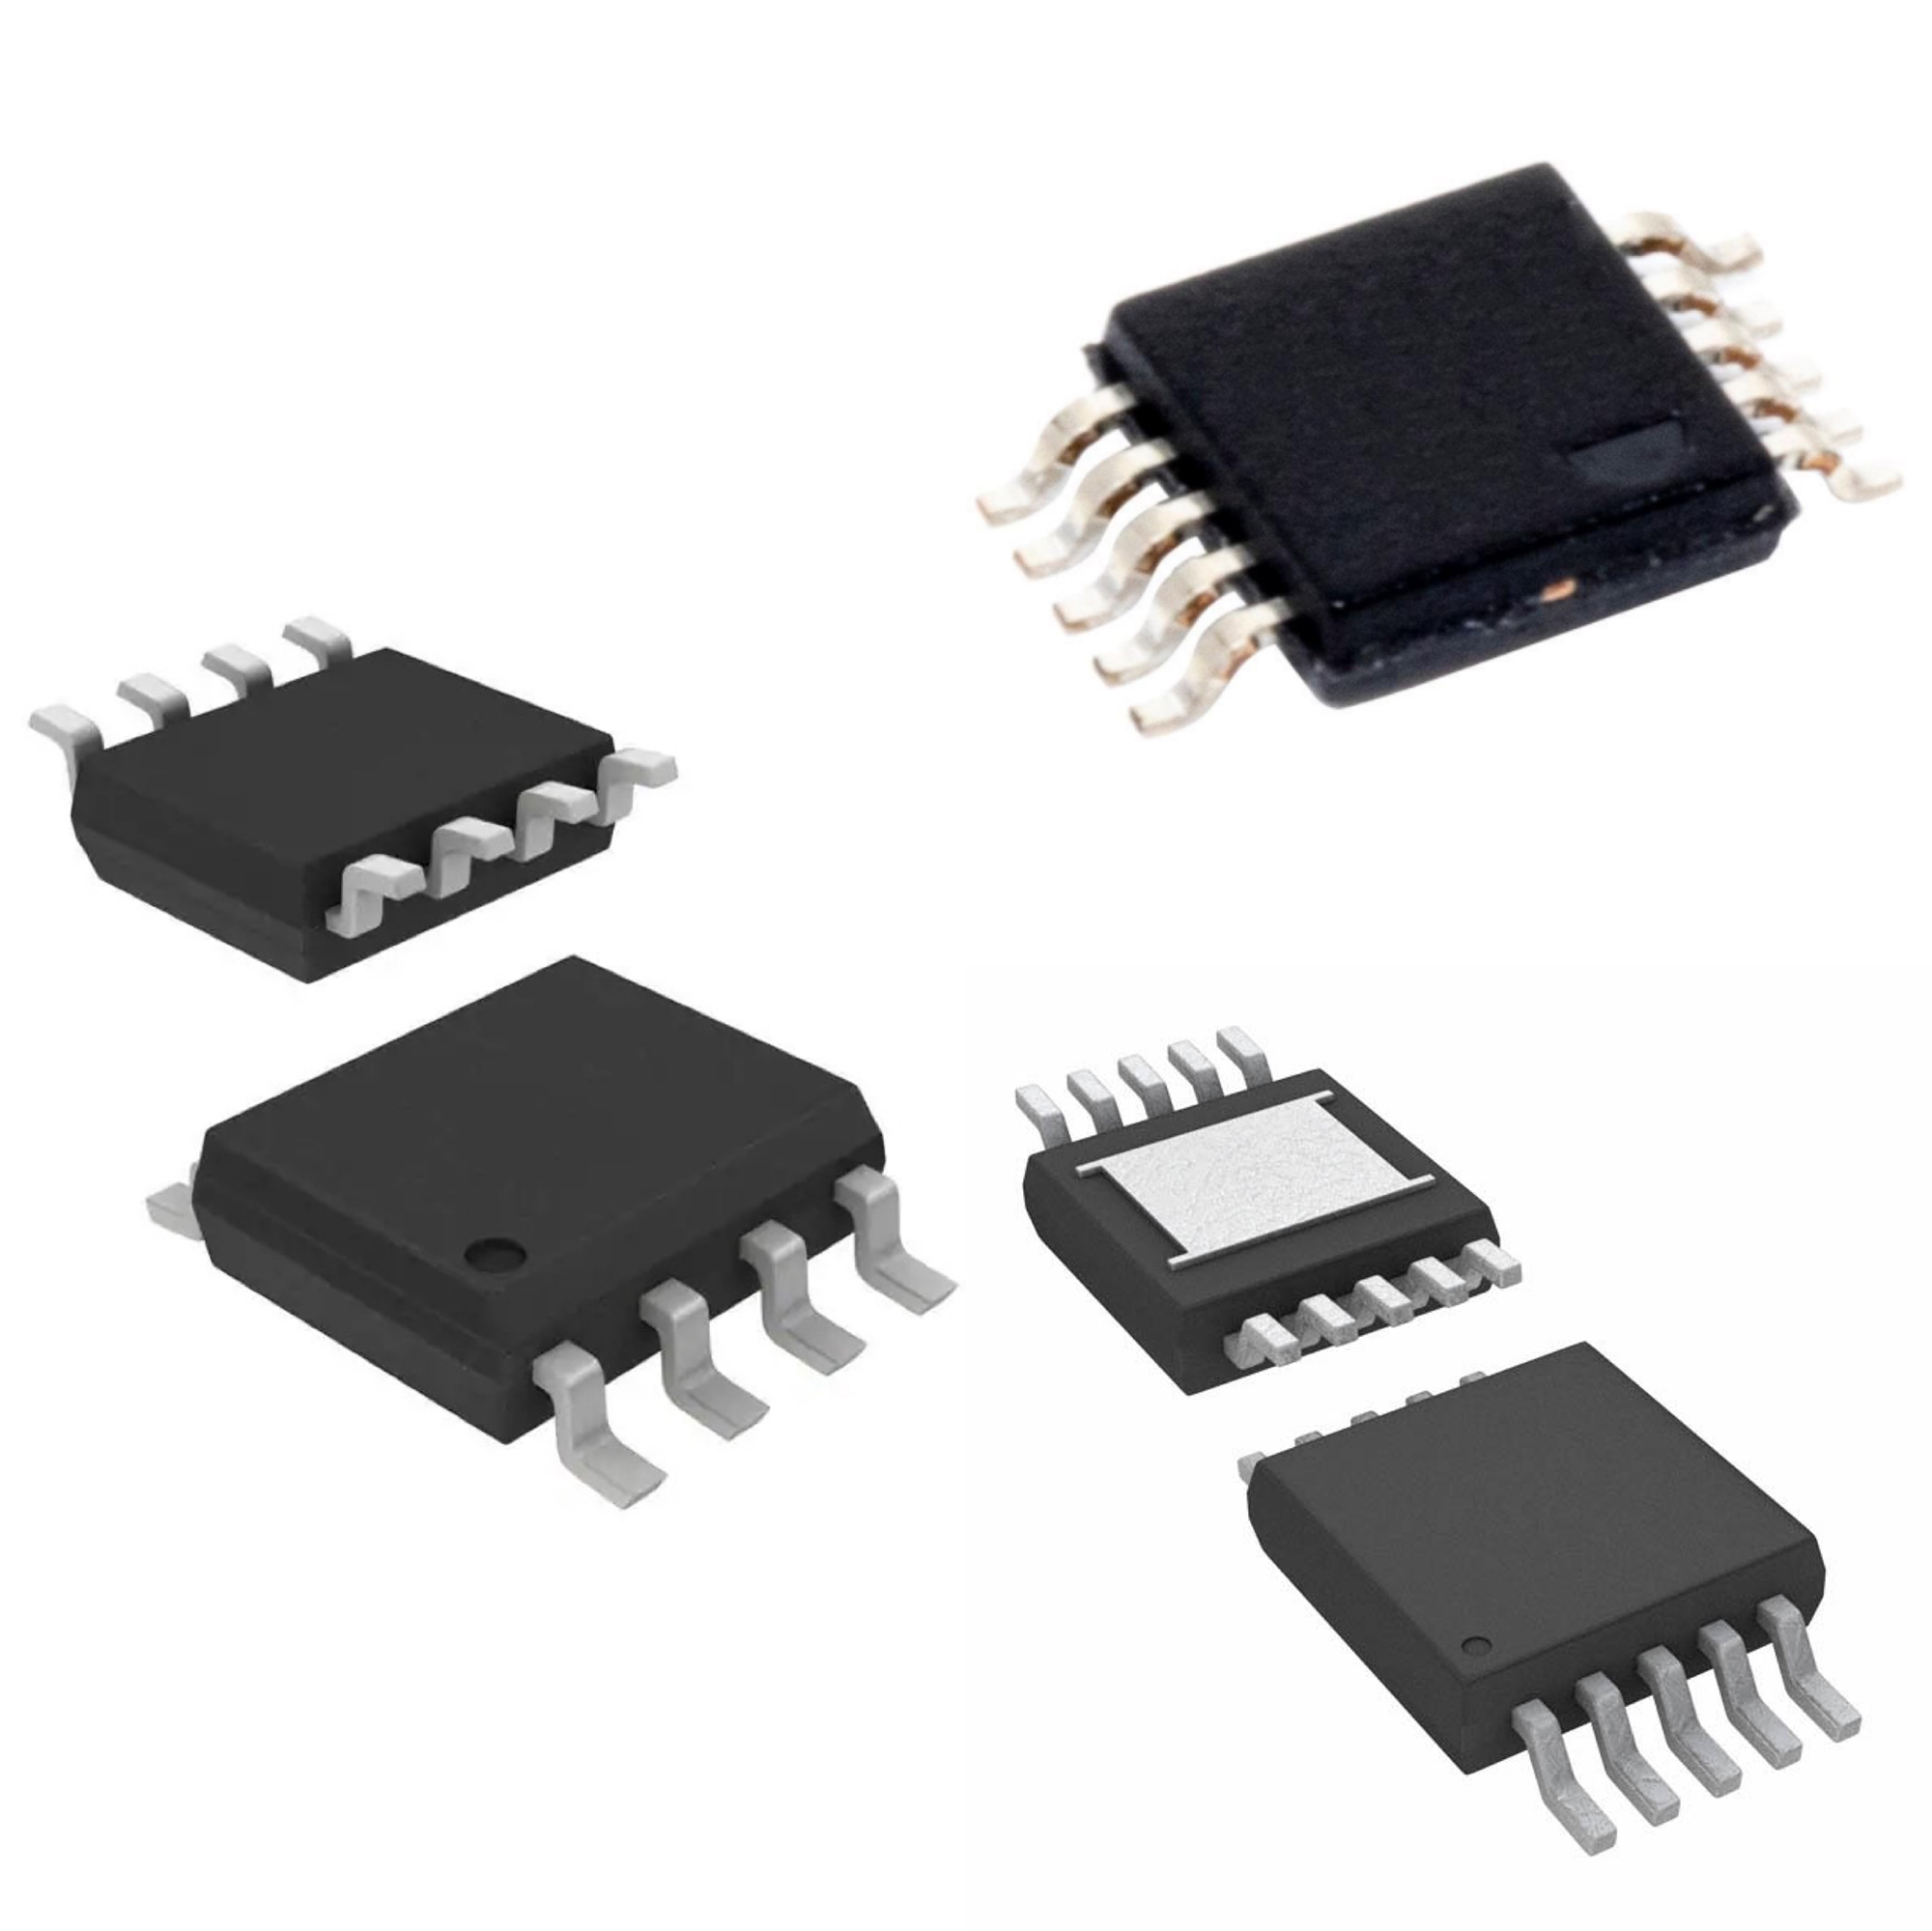 Excellent quality Acs772 – ADM660ARZ-REEL7 7V 100mA SOIC-8_150mil DC-DC Converters RoHS – Ronghua